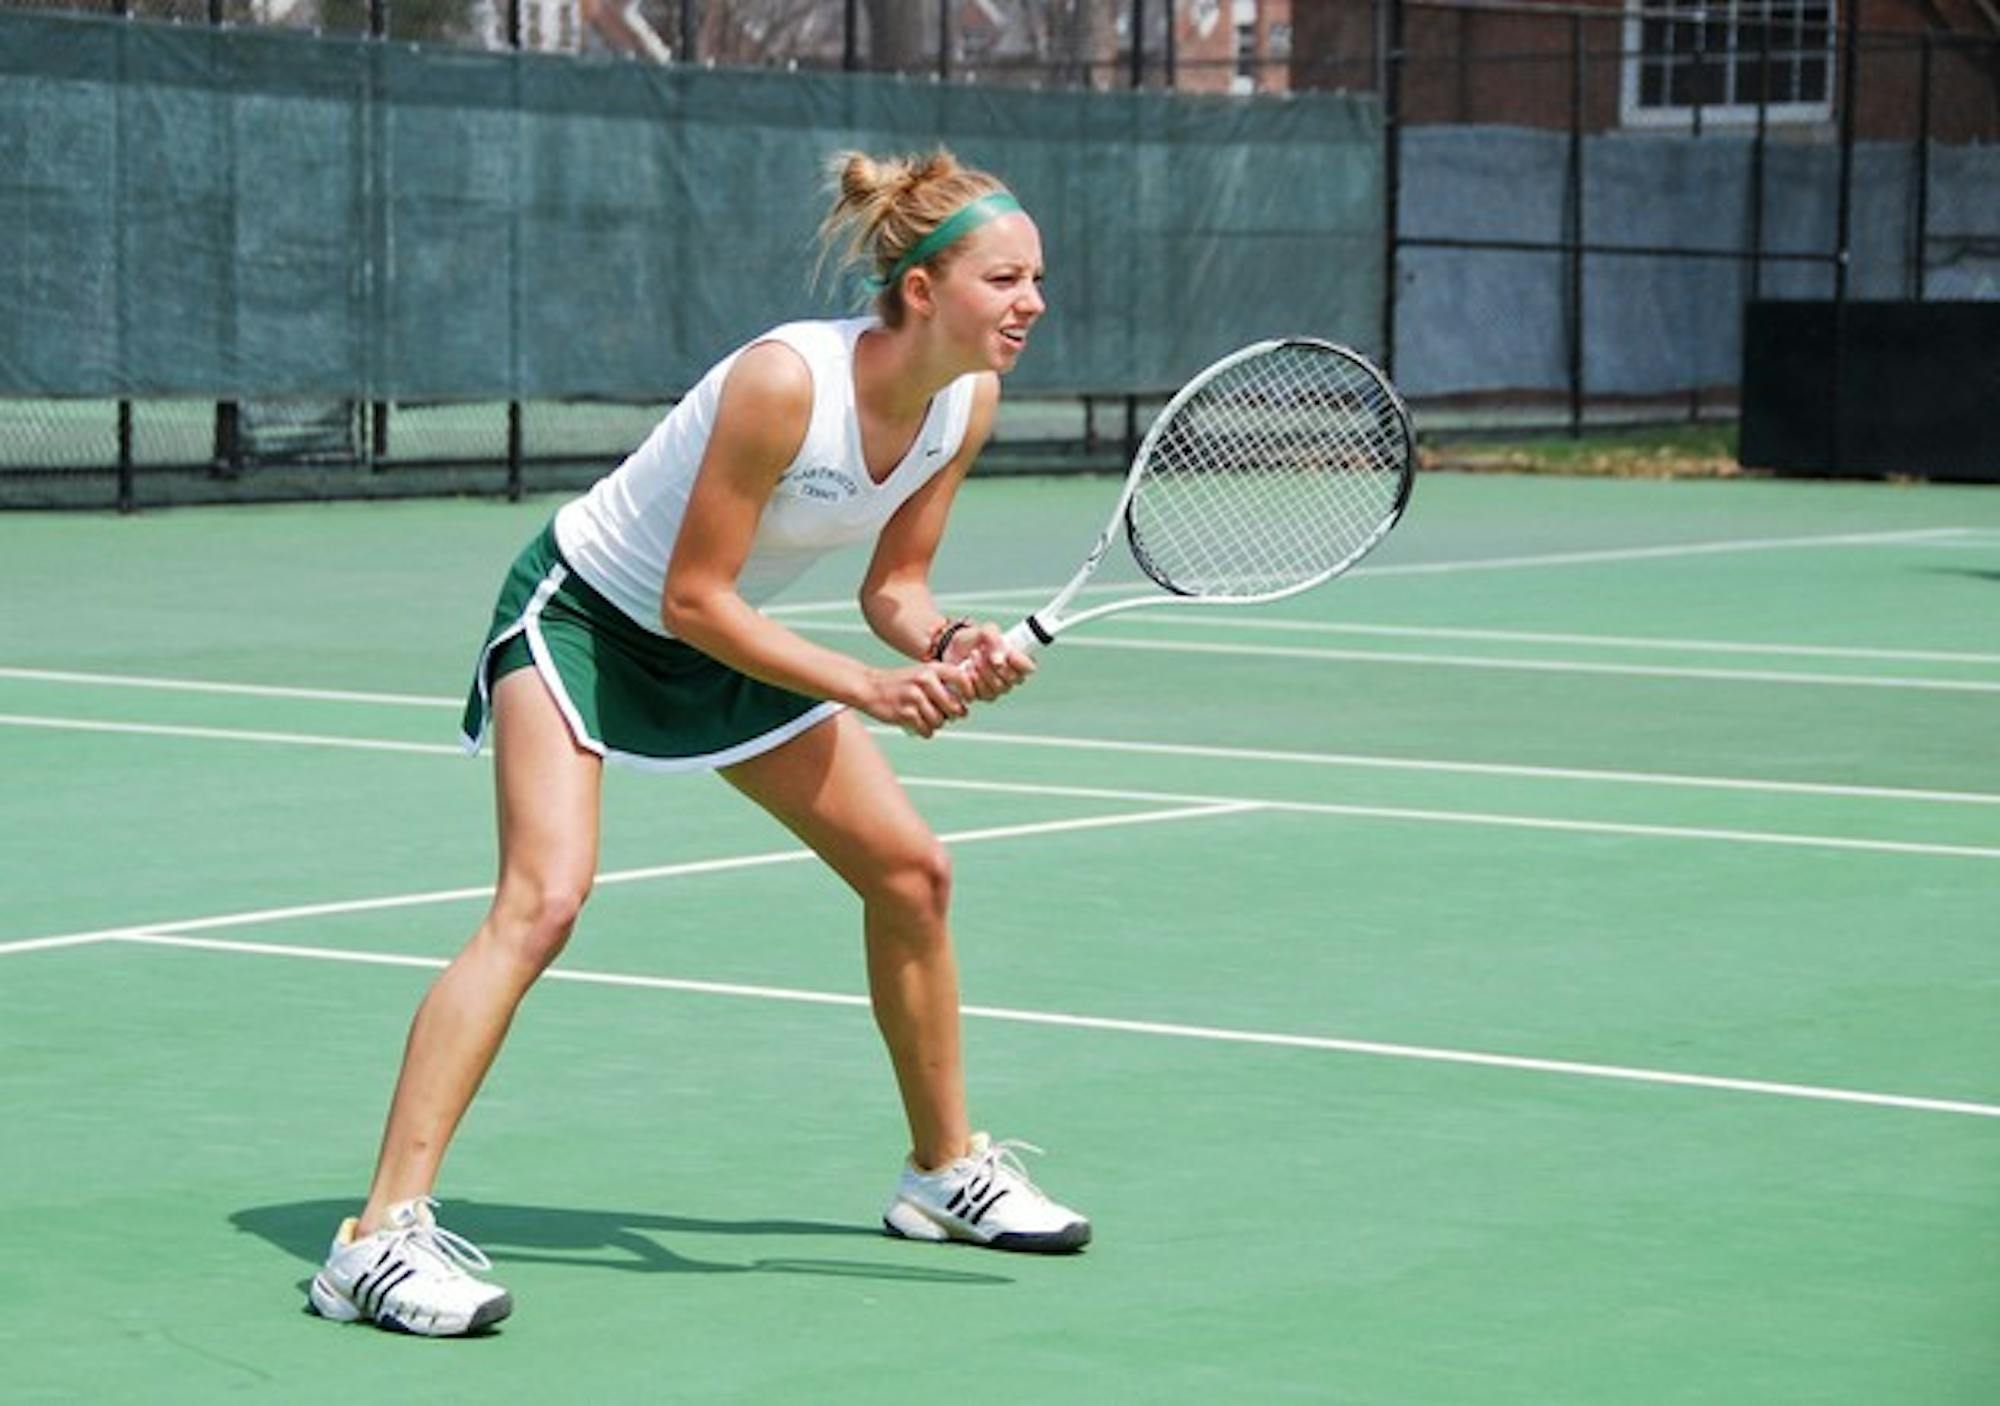 The duo of Jess Adler '10 and Mary Beth Winingham '10 (above) narrowly dropped the No. 2 doubles match, 9-8.